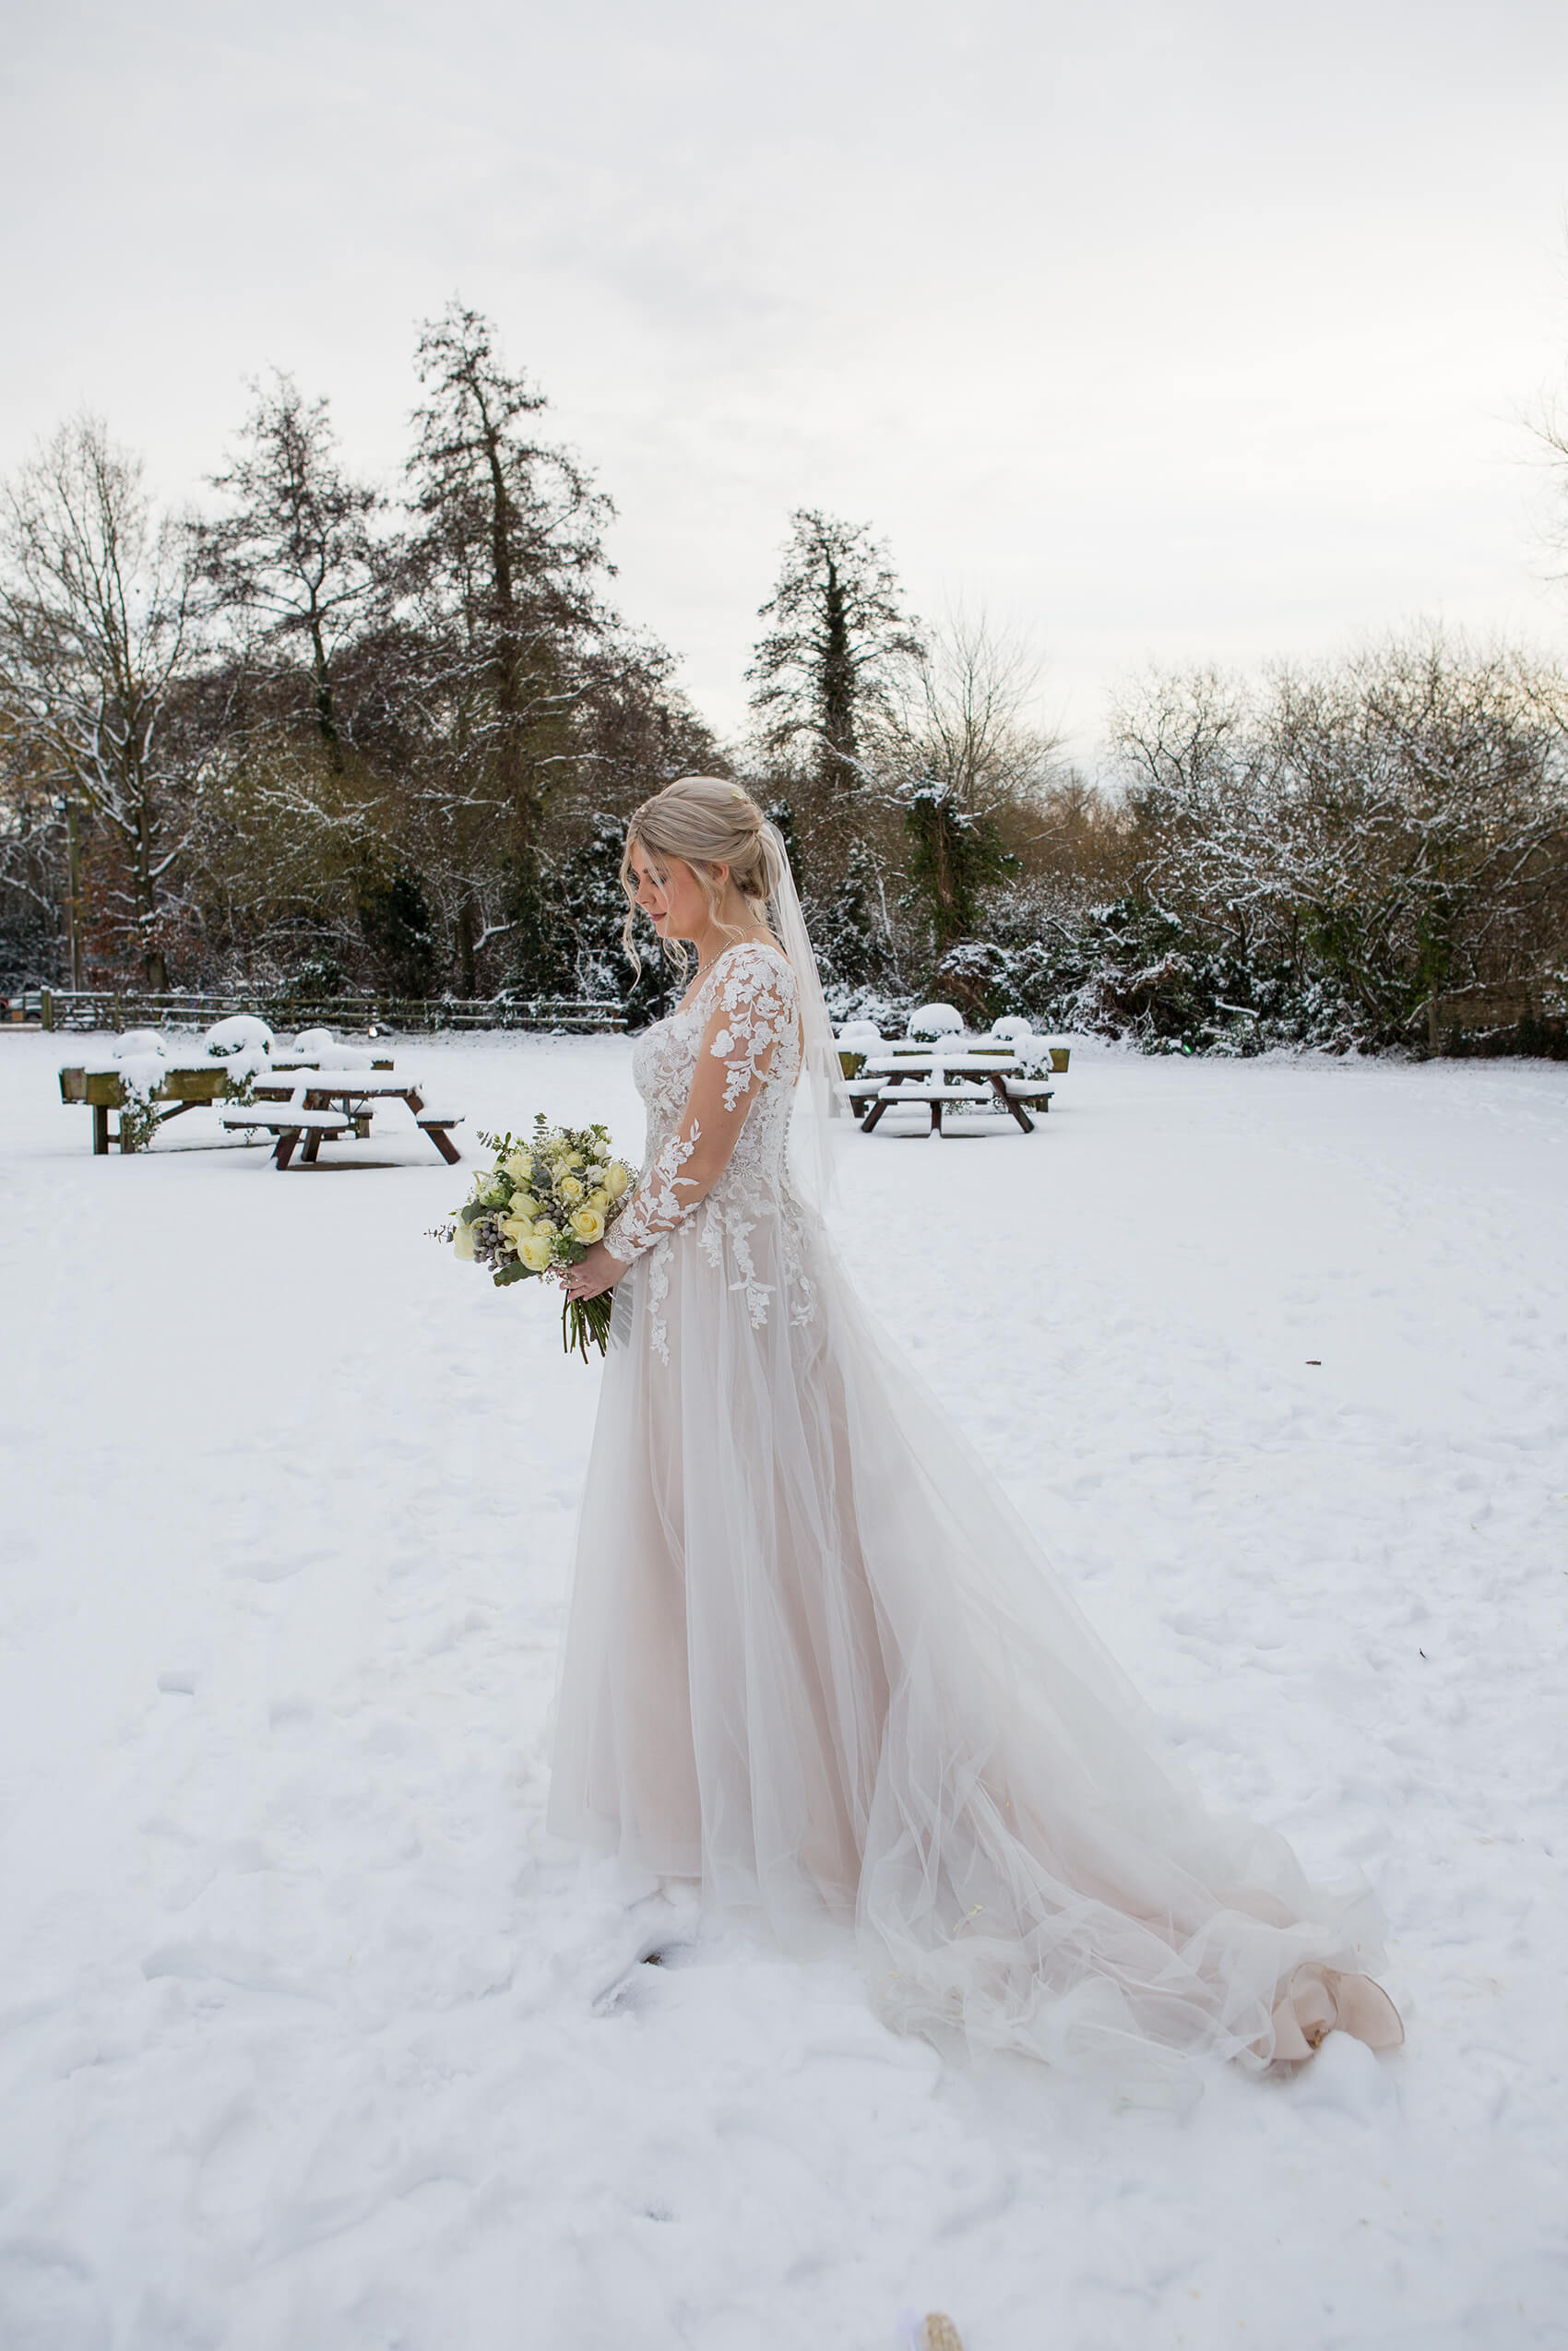 A bride standing in the snow